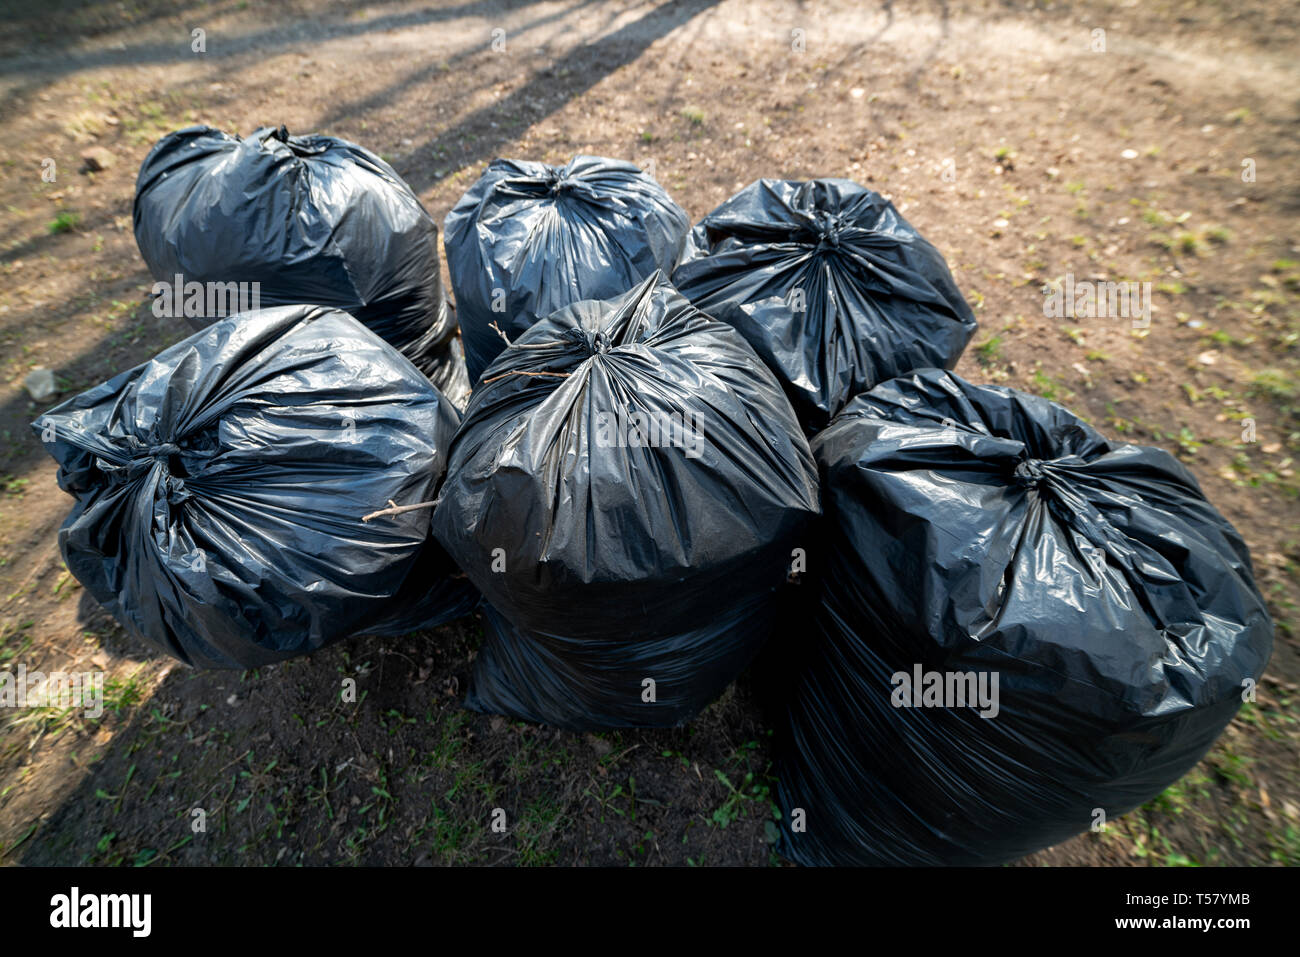 Trash bin and black garbage bag Stock Photo by ©smuayc 31845137